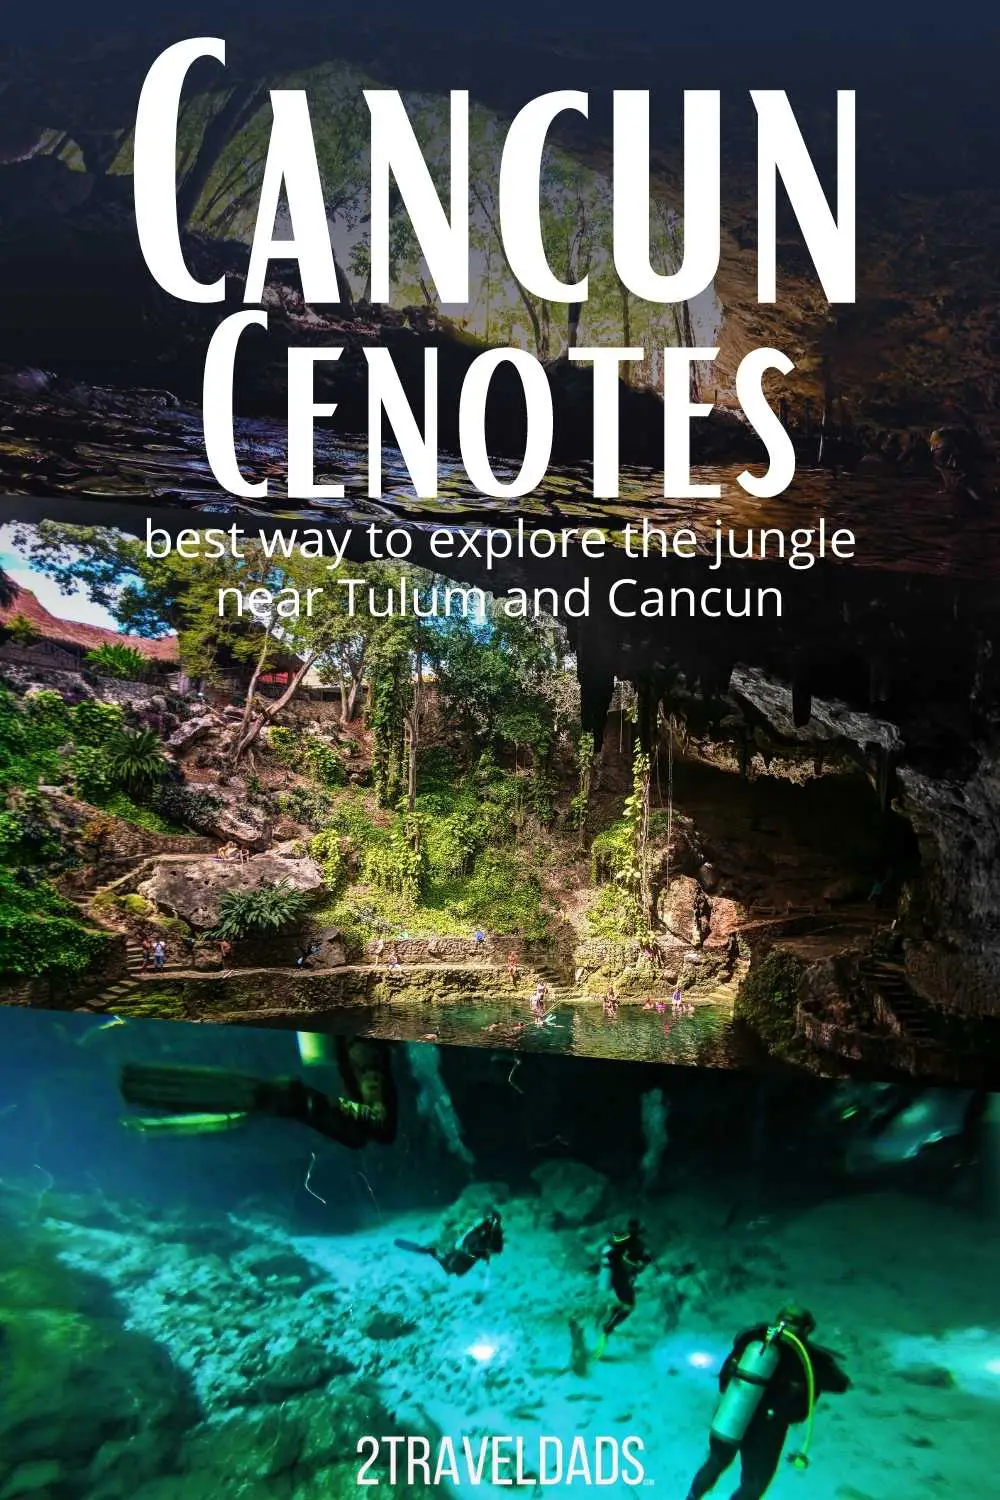 The best cenotes near Cancun aren't too far from the beaches. Easy day trips and tours for the best things to do in Cancun.